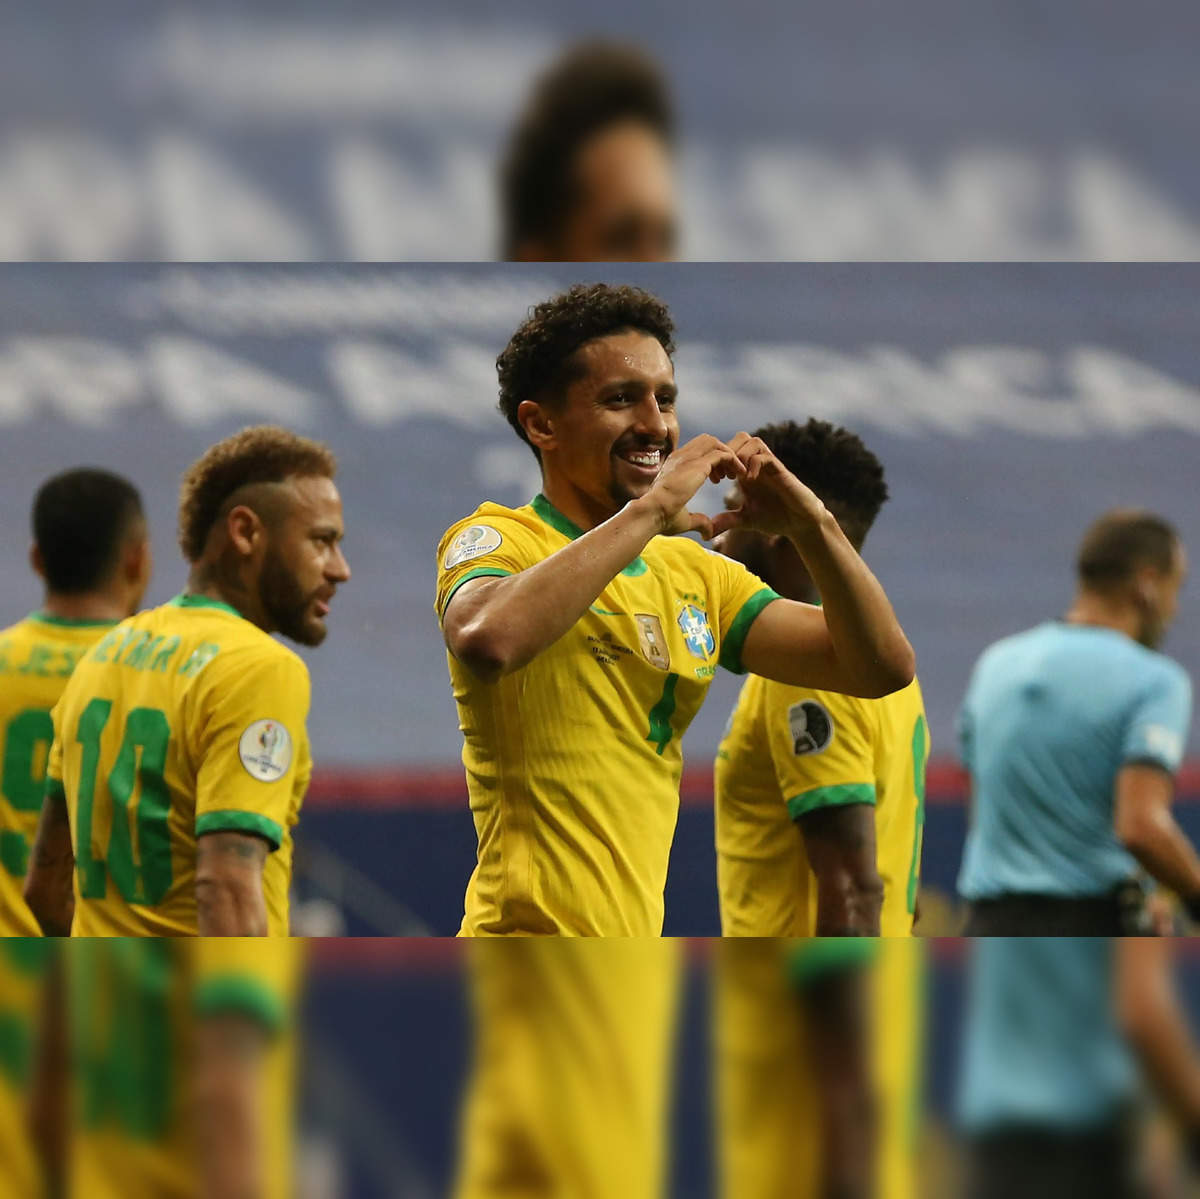 FIFA 23 World Cup mode released with authentic Brazil national